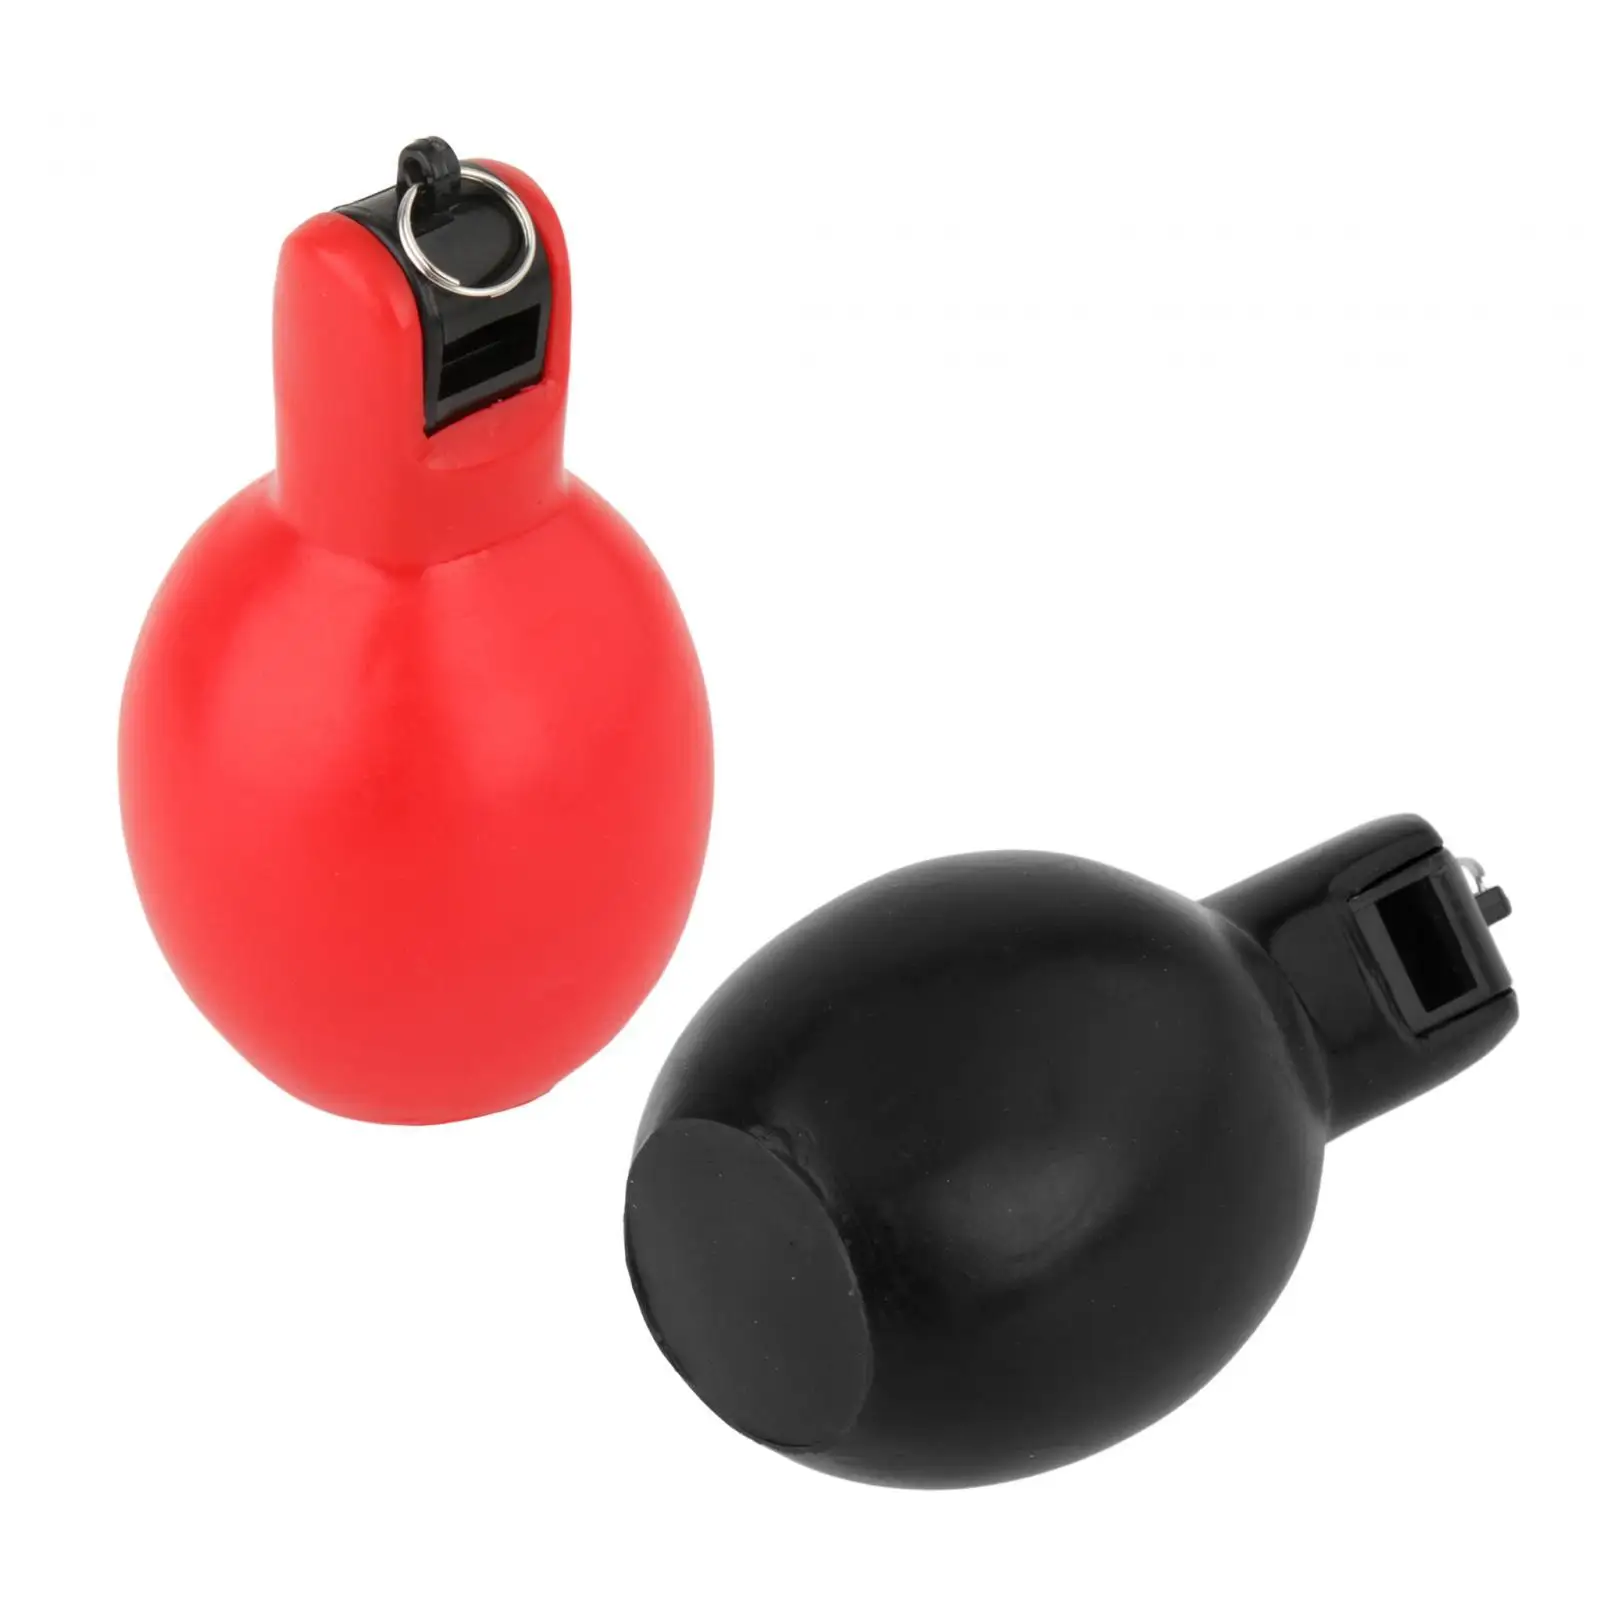 2x Hand Squeeze Whistles Manual Trainer Whistle for Camping Trekking Walking